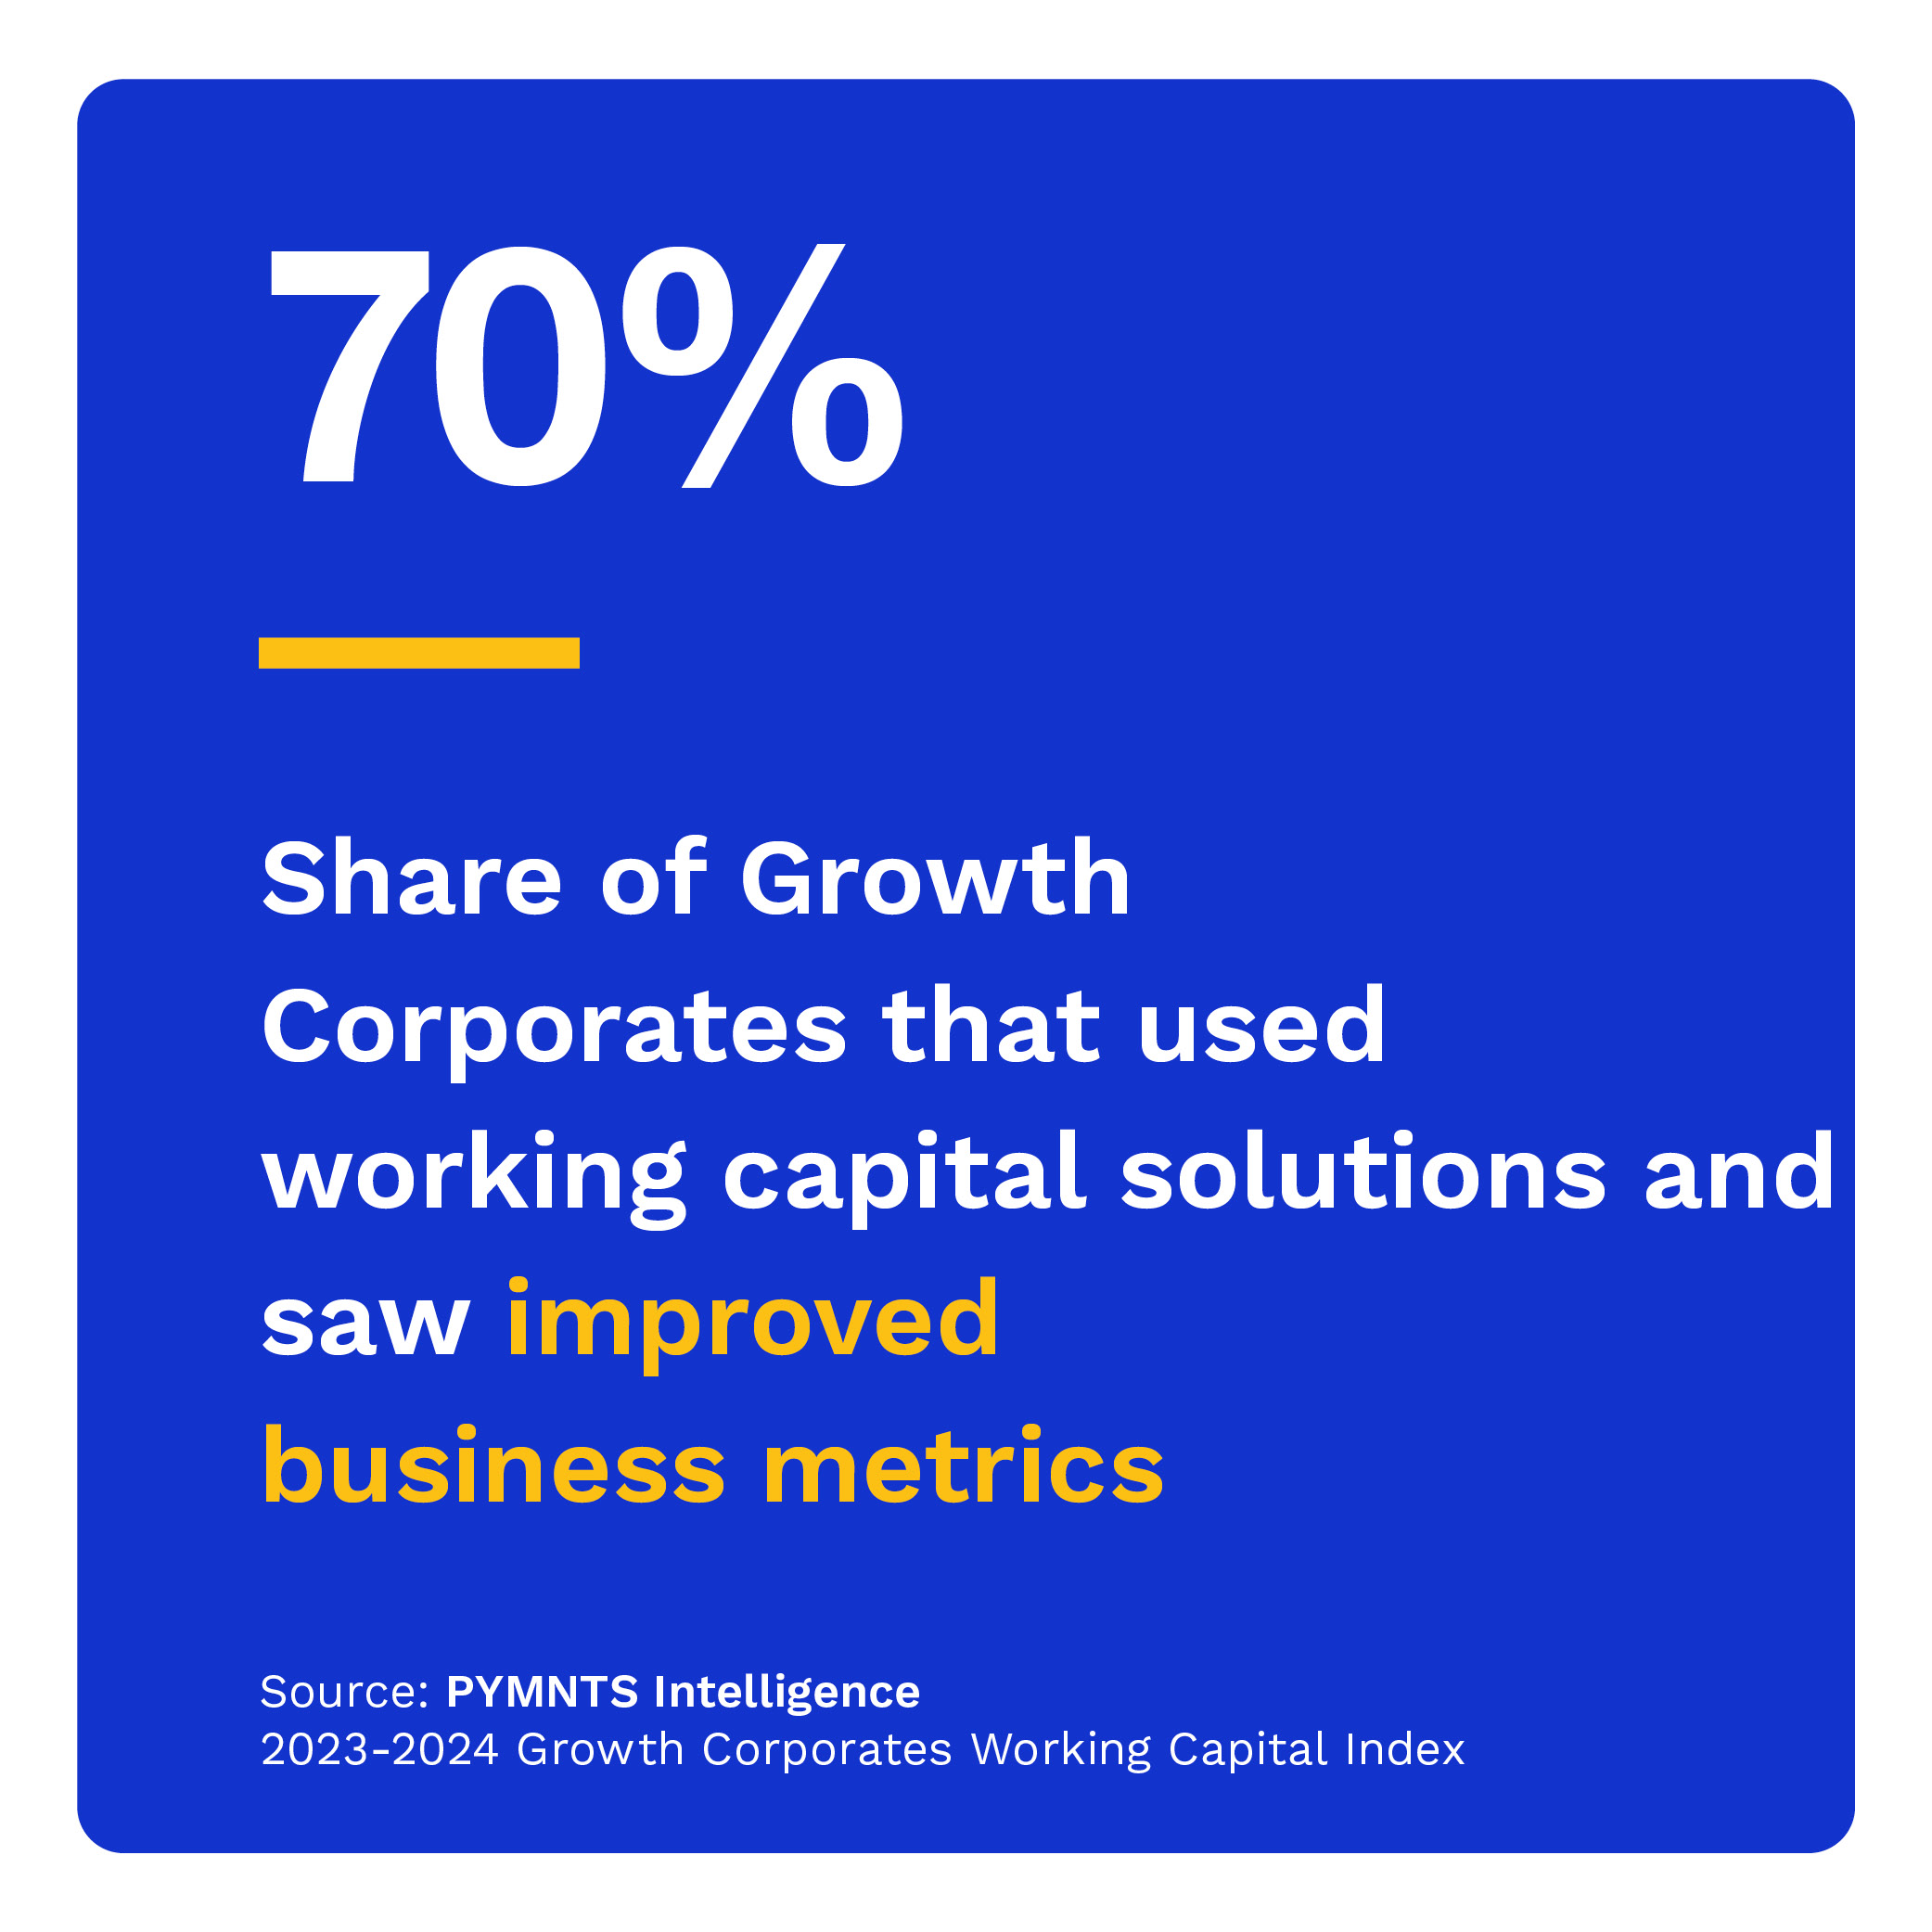 70%: Share of Growth Corporates that used working capital solutions and saw improved business metrics